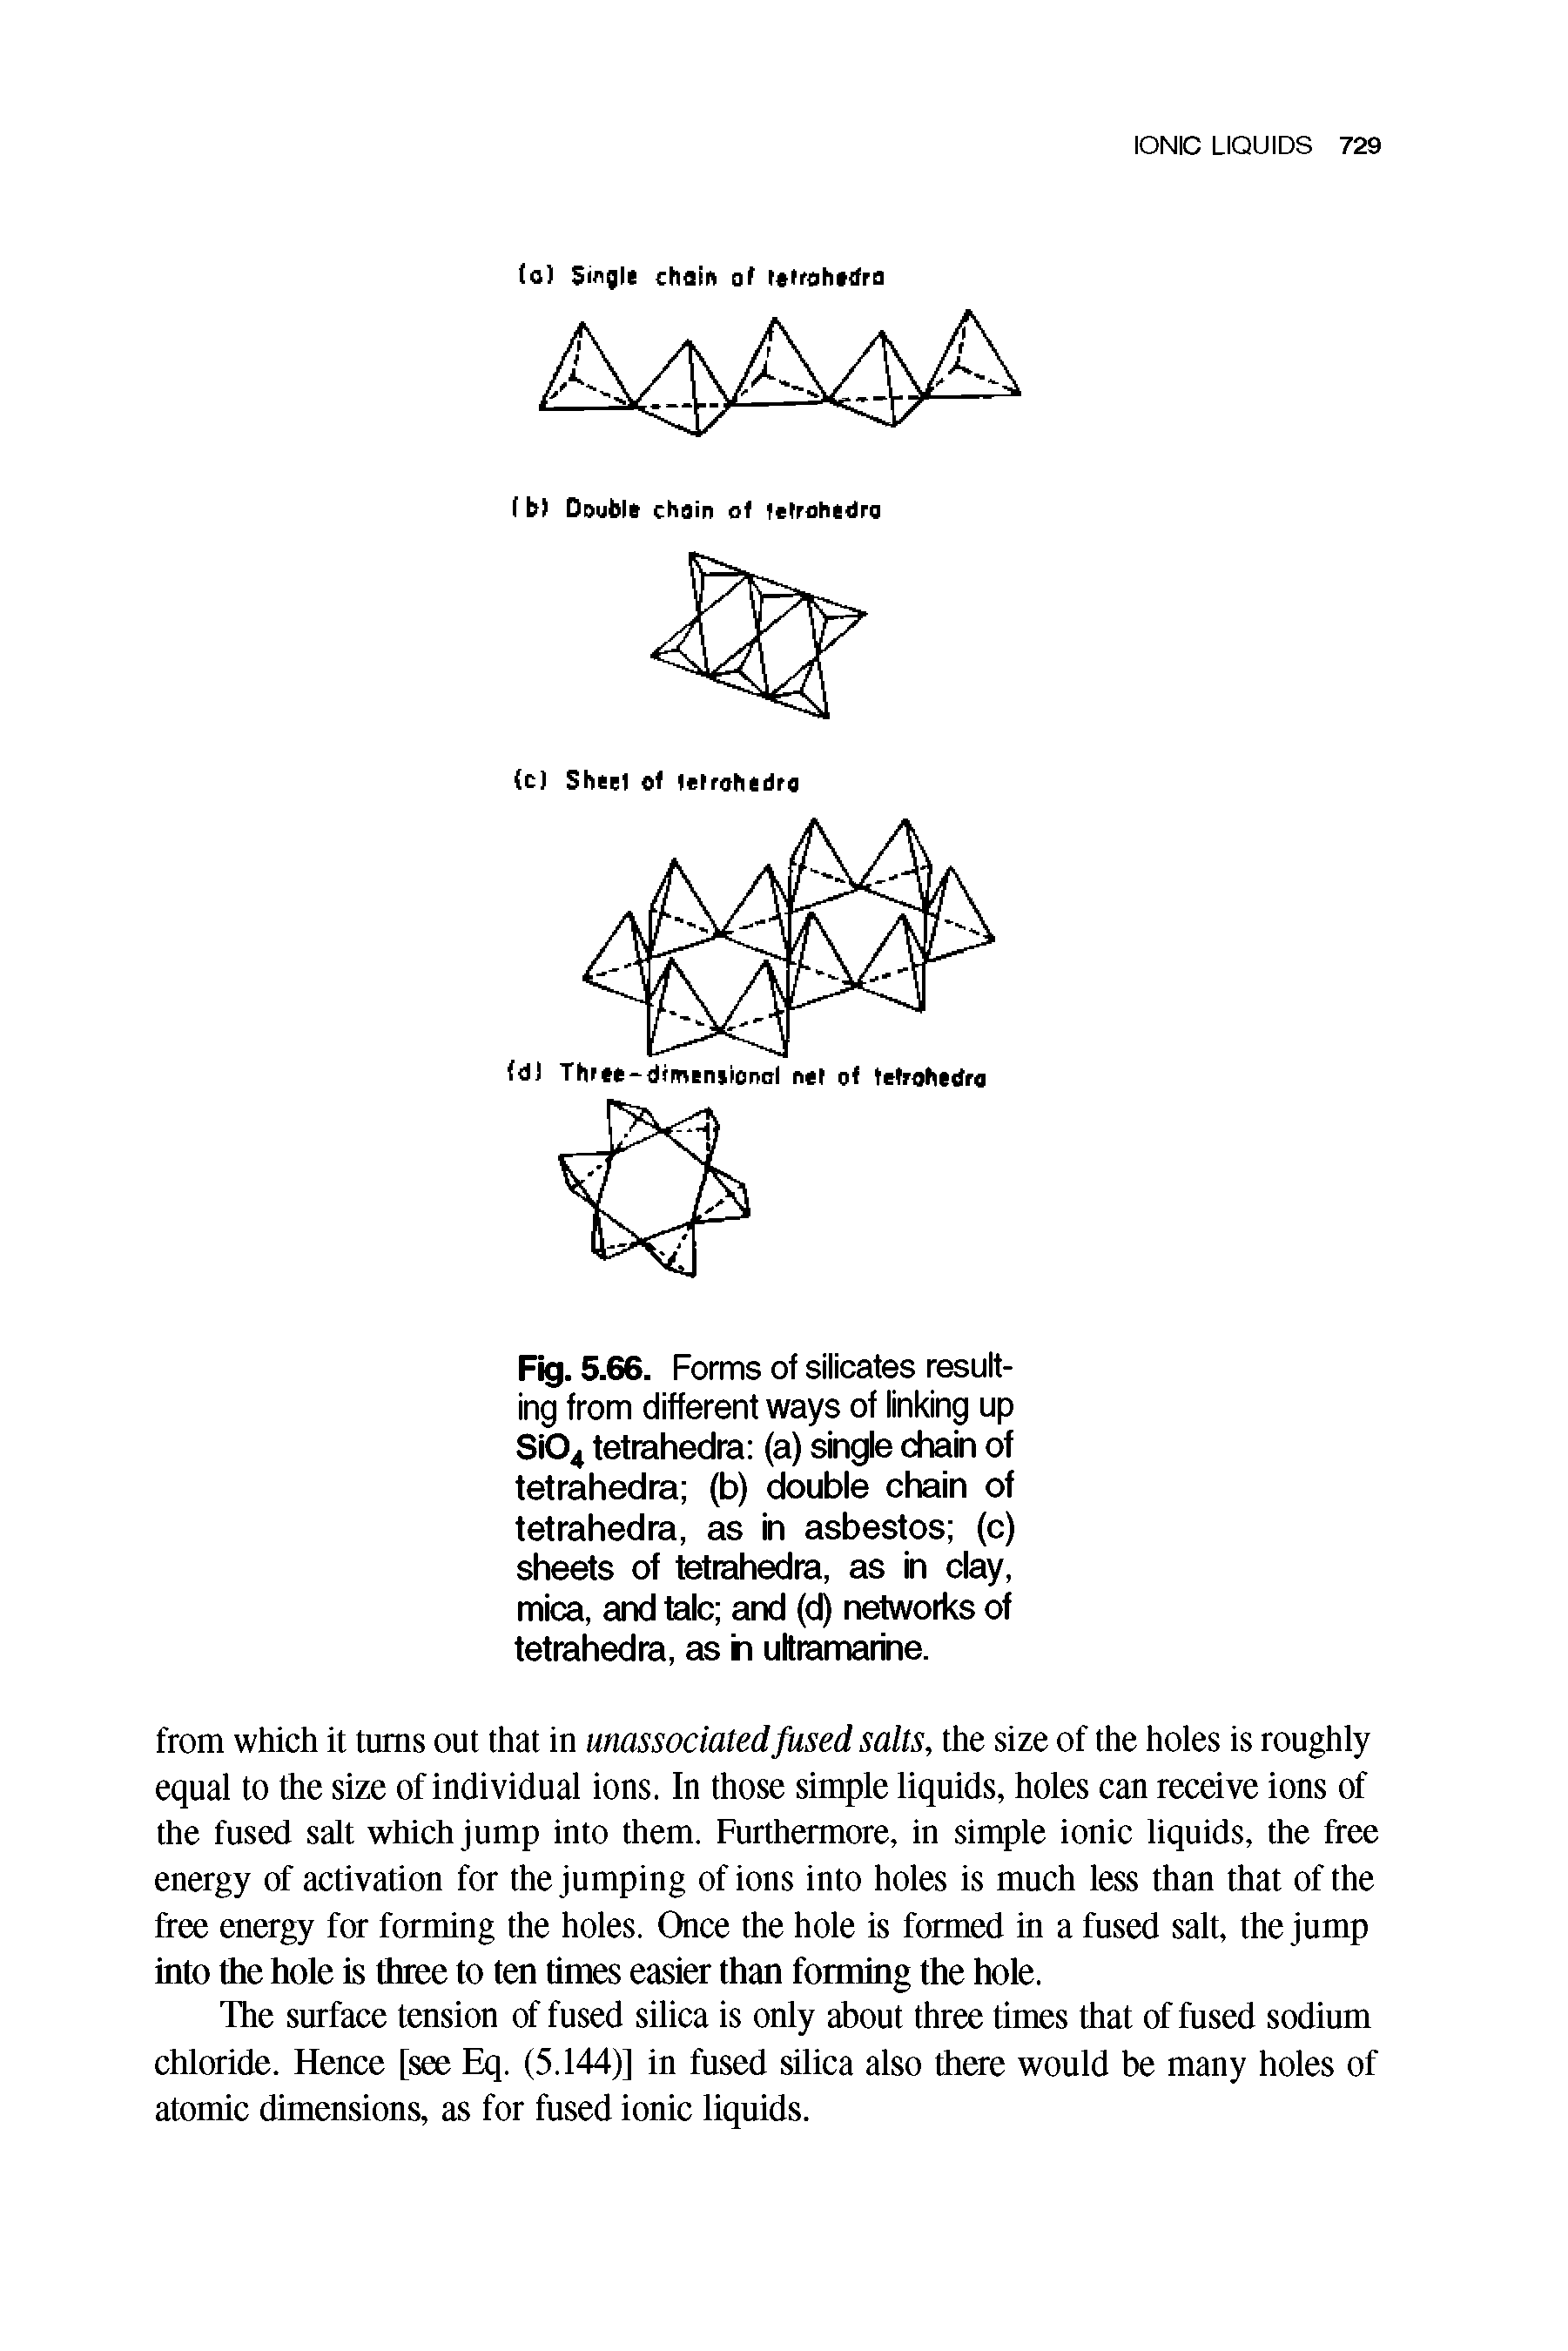 Fig. 5.66. Forms of silicates resulting from different ways of linking up Si04 tetrahedra (a) single chain of tetrahedra (b) double chain of tetrahedra, as in asbestos (c) sheets of tetrahedra, as in clay, mica, and talc and (d) networks of tetrahedra, as ii ultiamaiine.